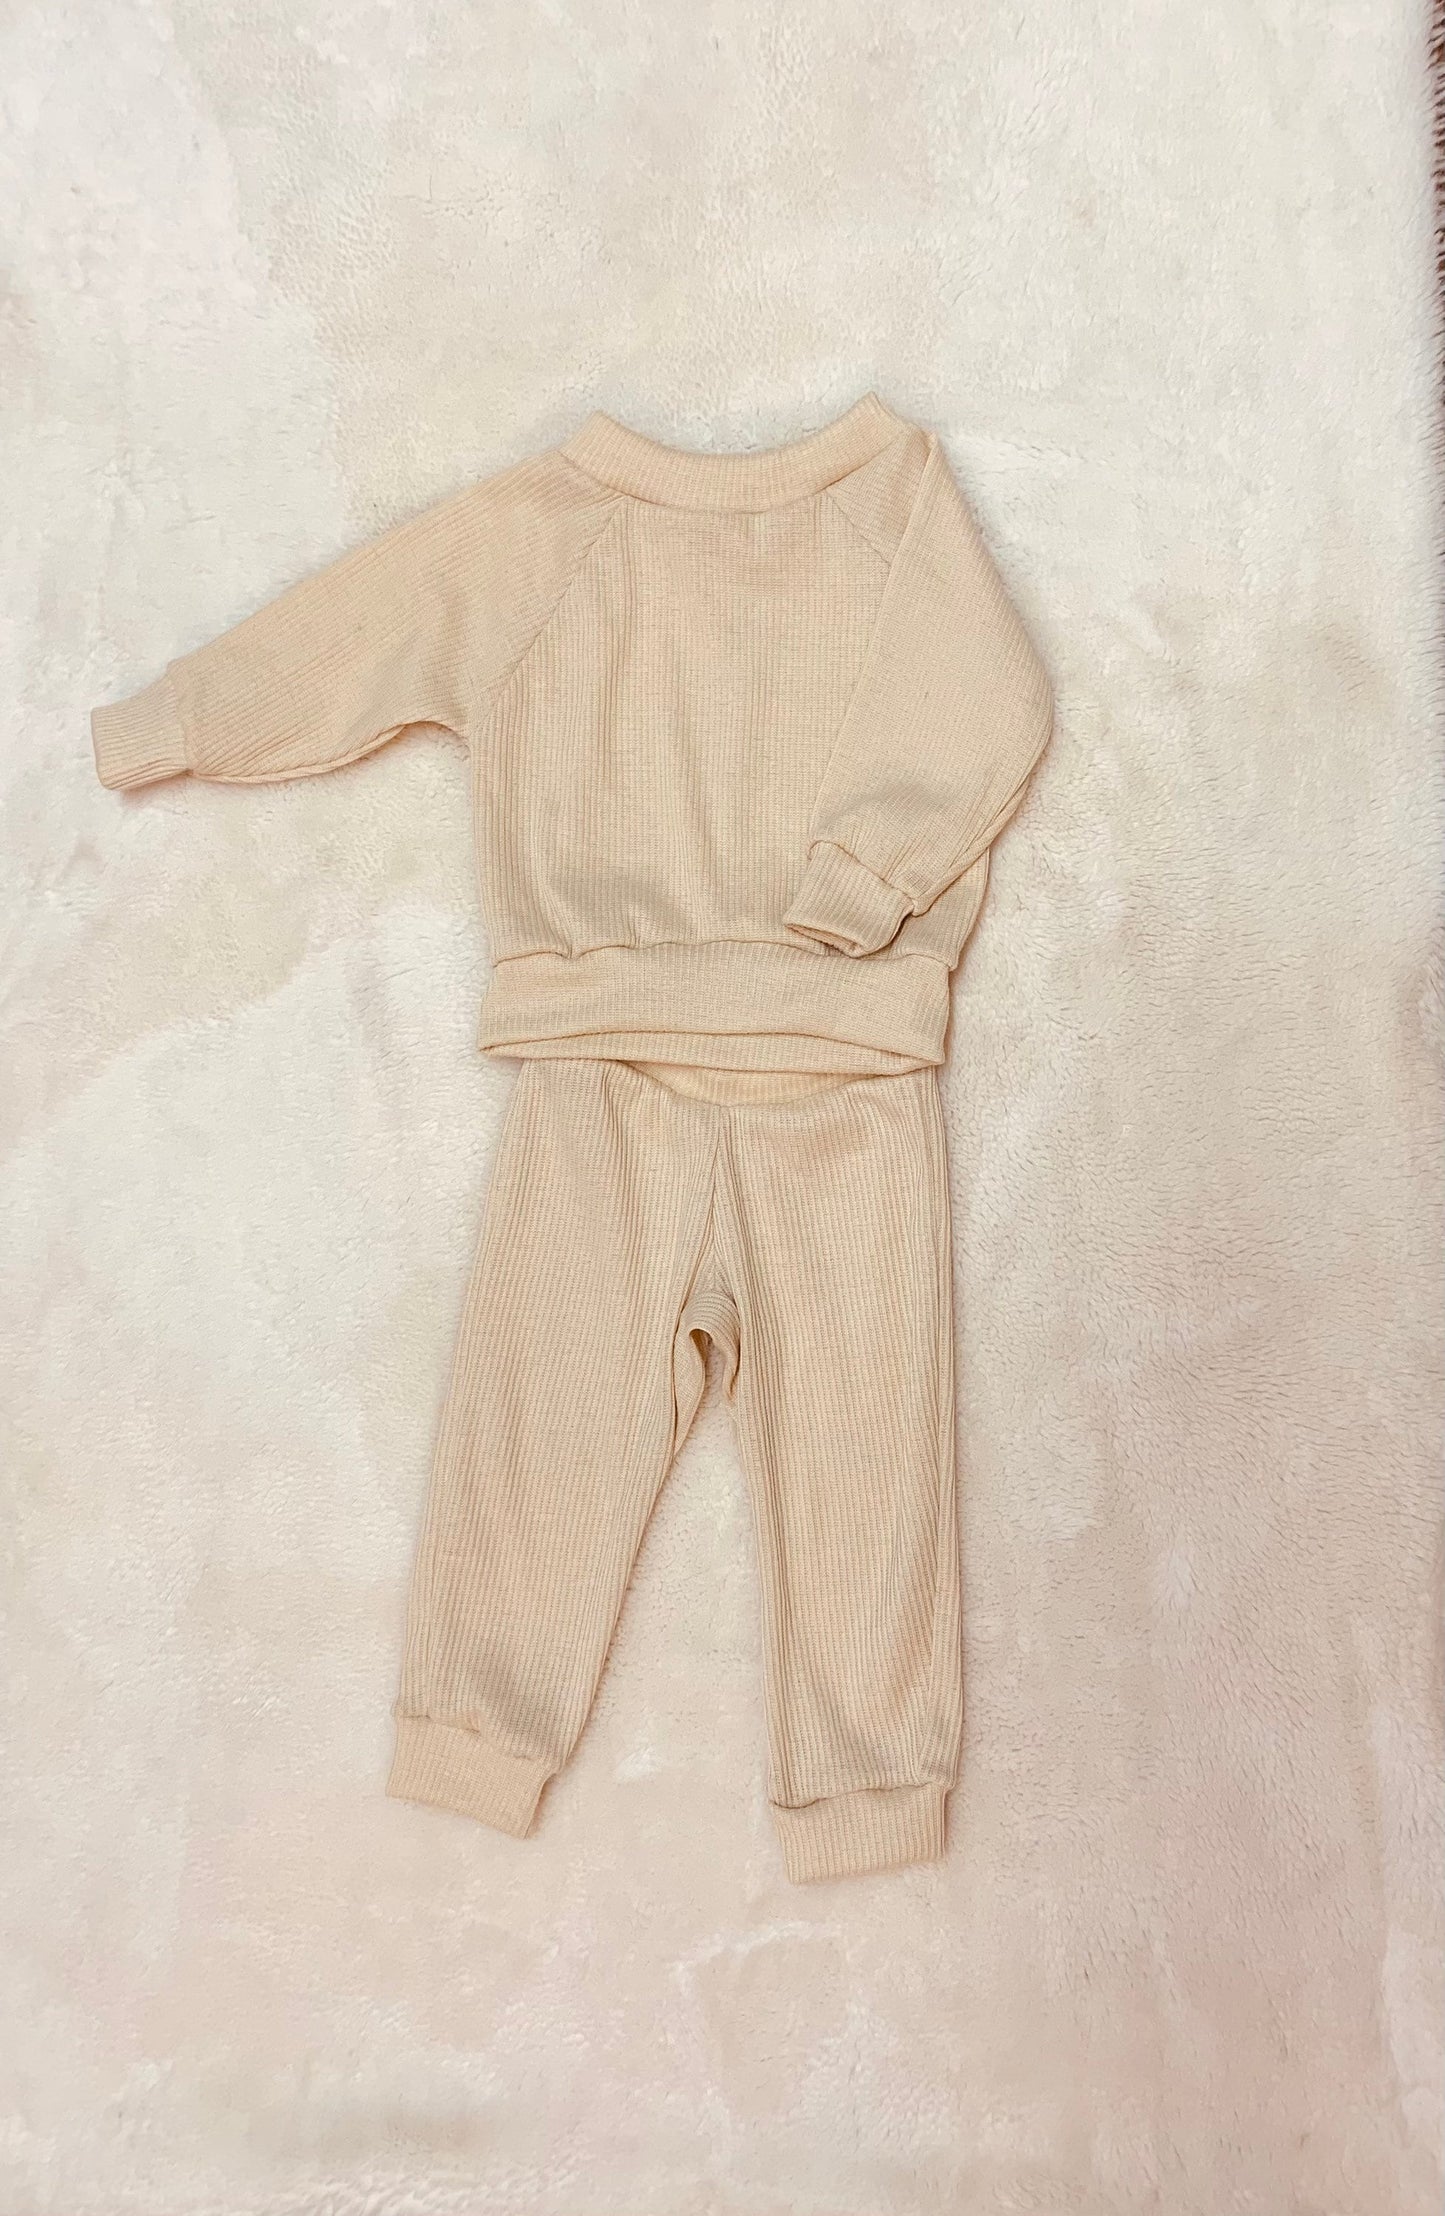 Unisex Loungewear available in more colors|Boys loungewear|Girls Loungewear|Kids Comfortable Clothes|Loungewear Sets|Wholesome Goods Co